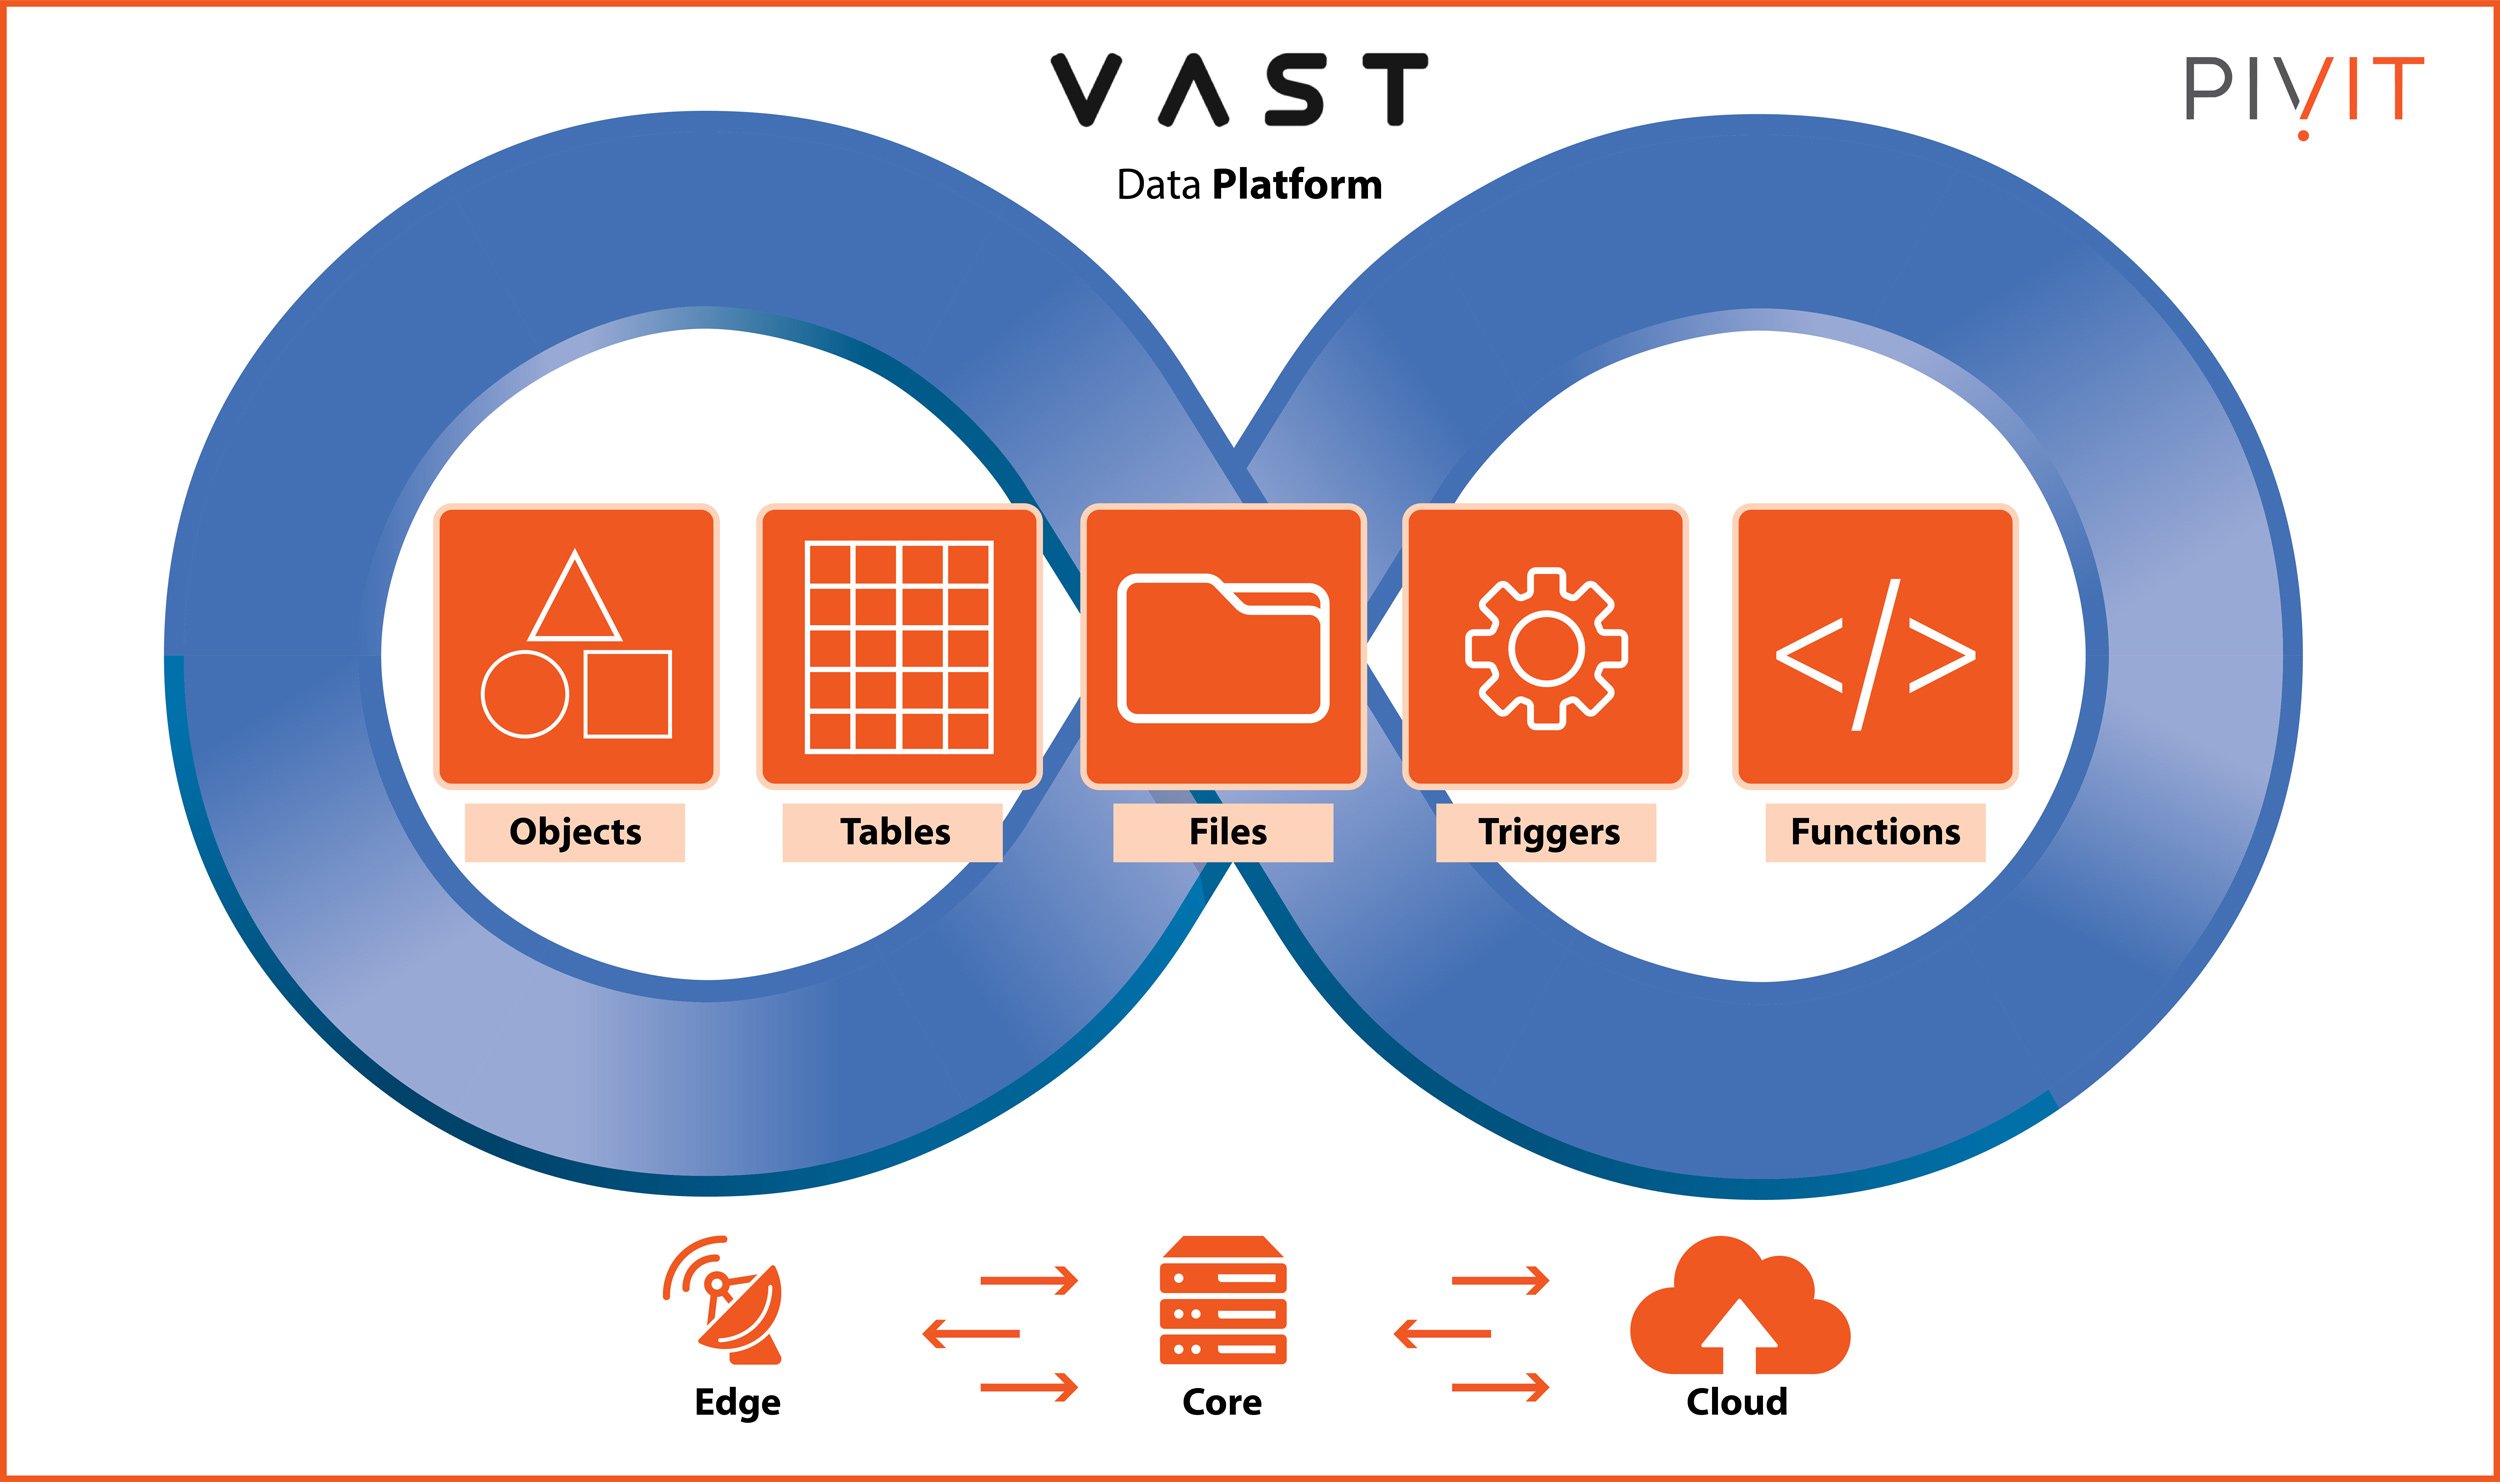 VAST Data Platform - Objects, Tables, Files, Triggers, and Functions working from the edge to the core and to the cloud